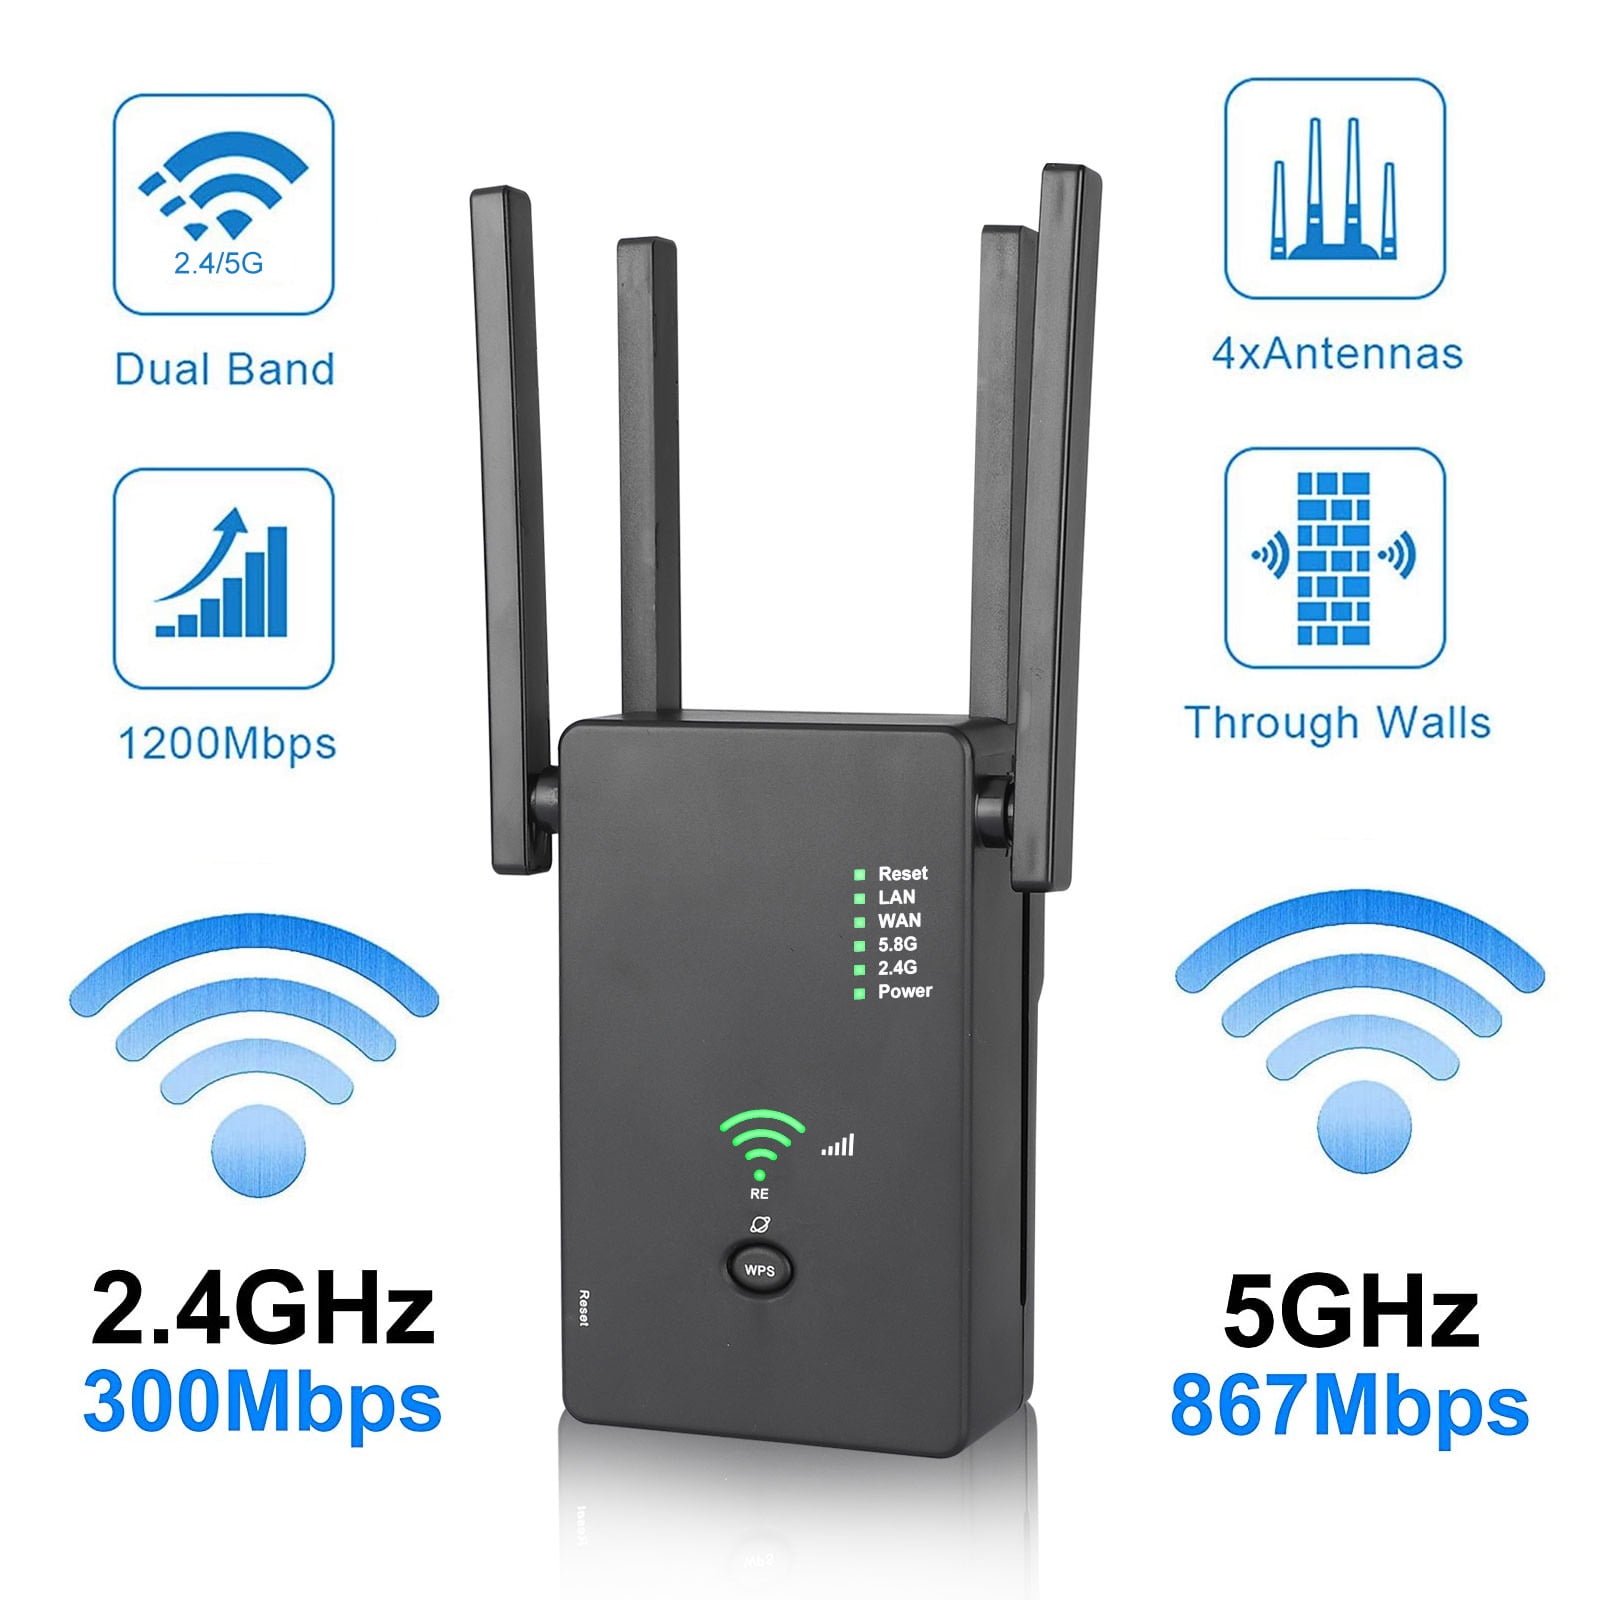 Long Range Amplifier with 4 Antenna Alexa Compatible 2.4 & 5GHz Dual Band Signal Booster WiFi Range Extender 1200Mbps Internet Booster up to 1500 sq.ft